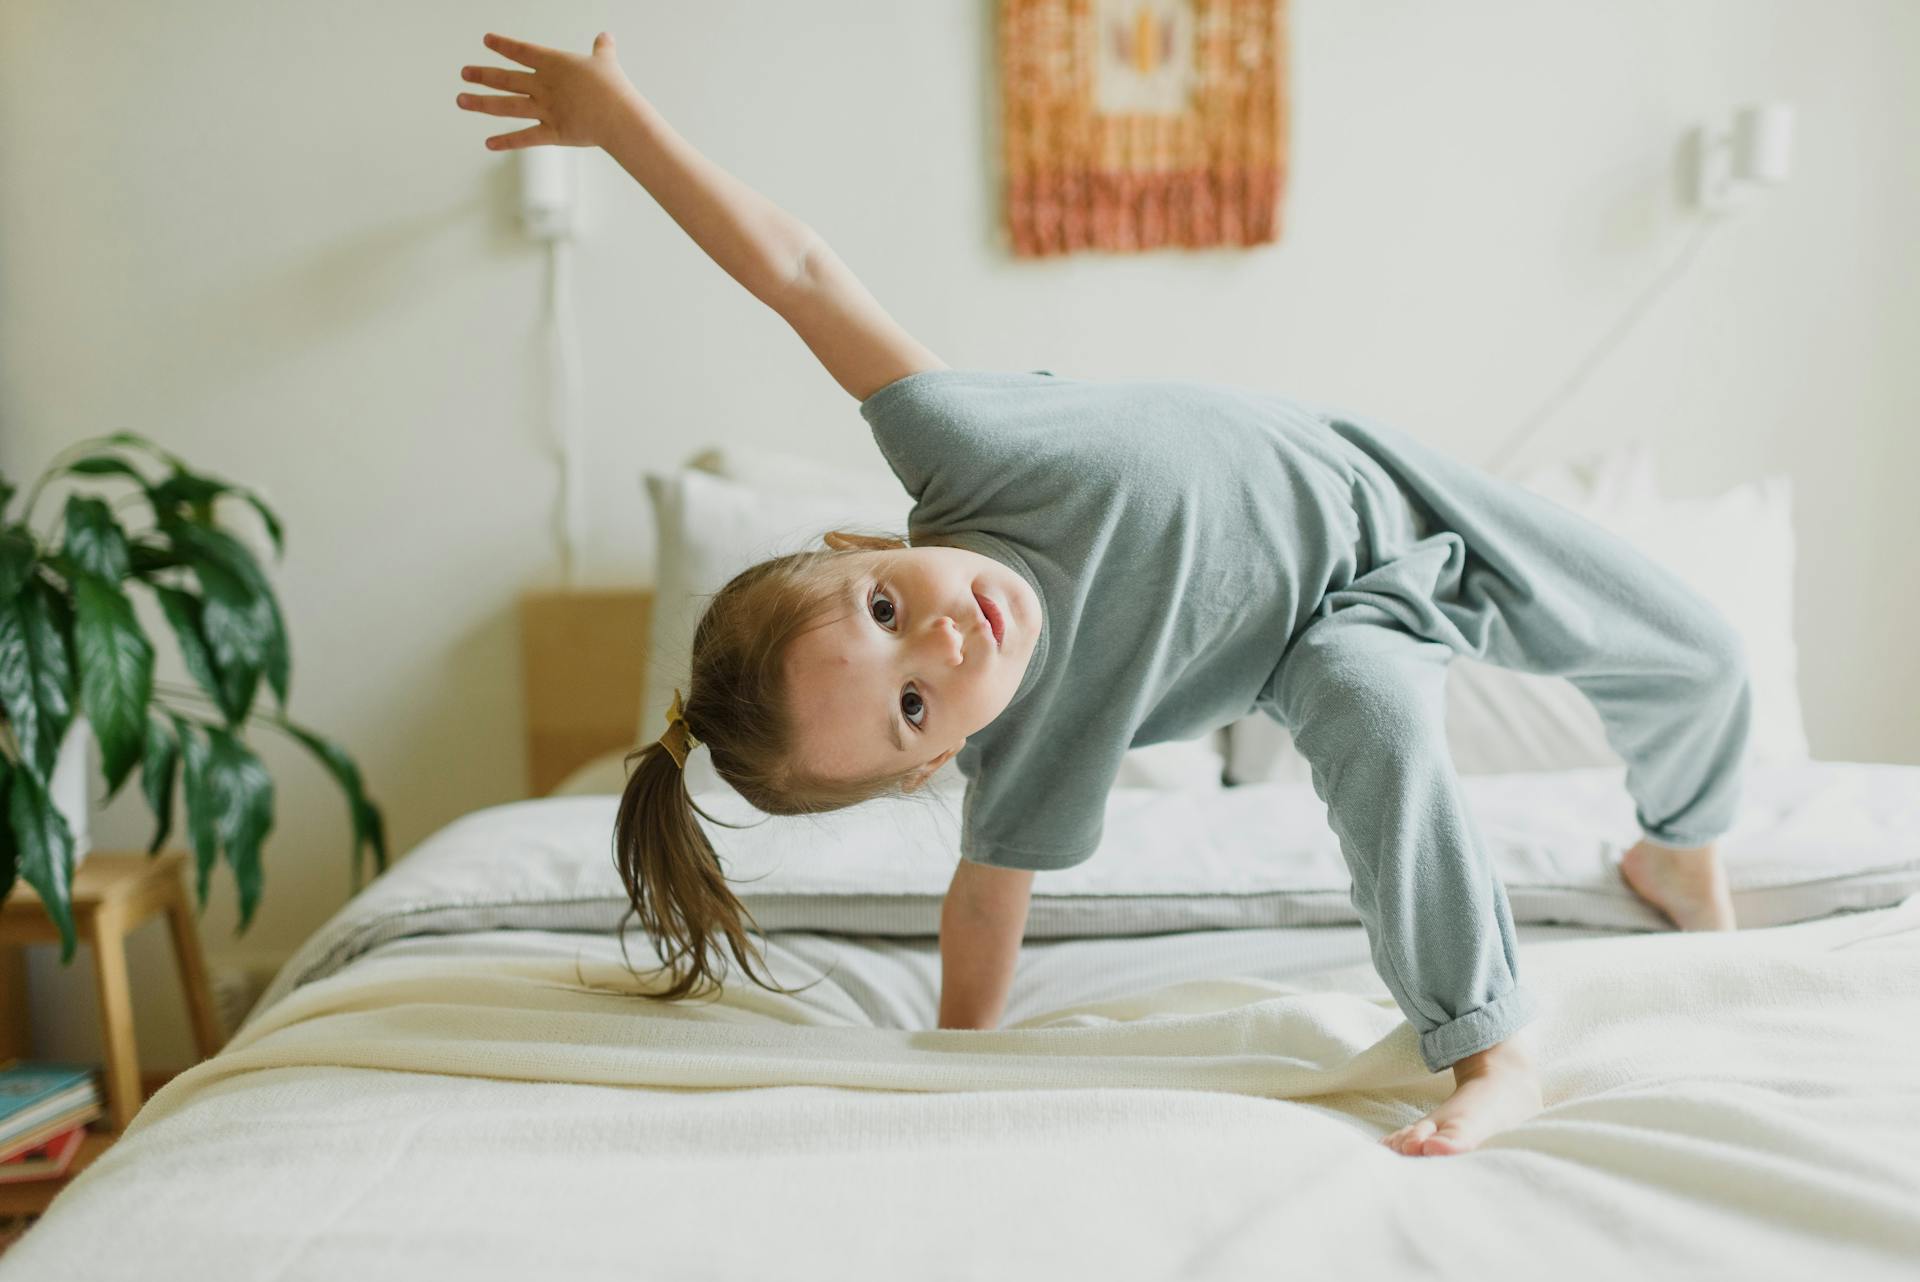 Adorable little girl having fun on bed at home